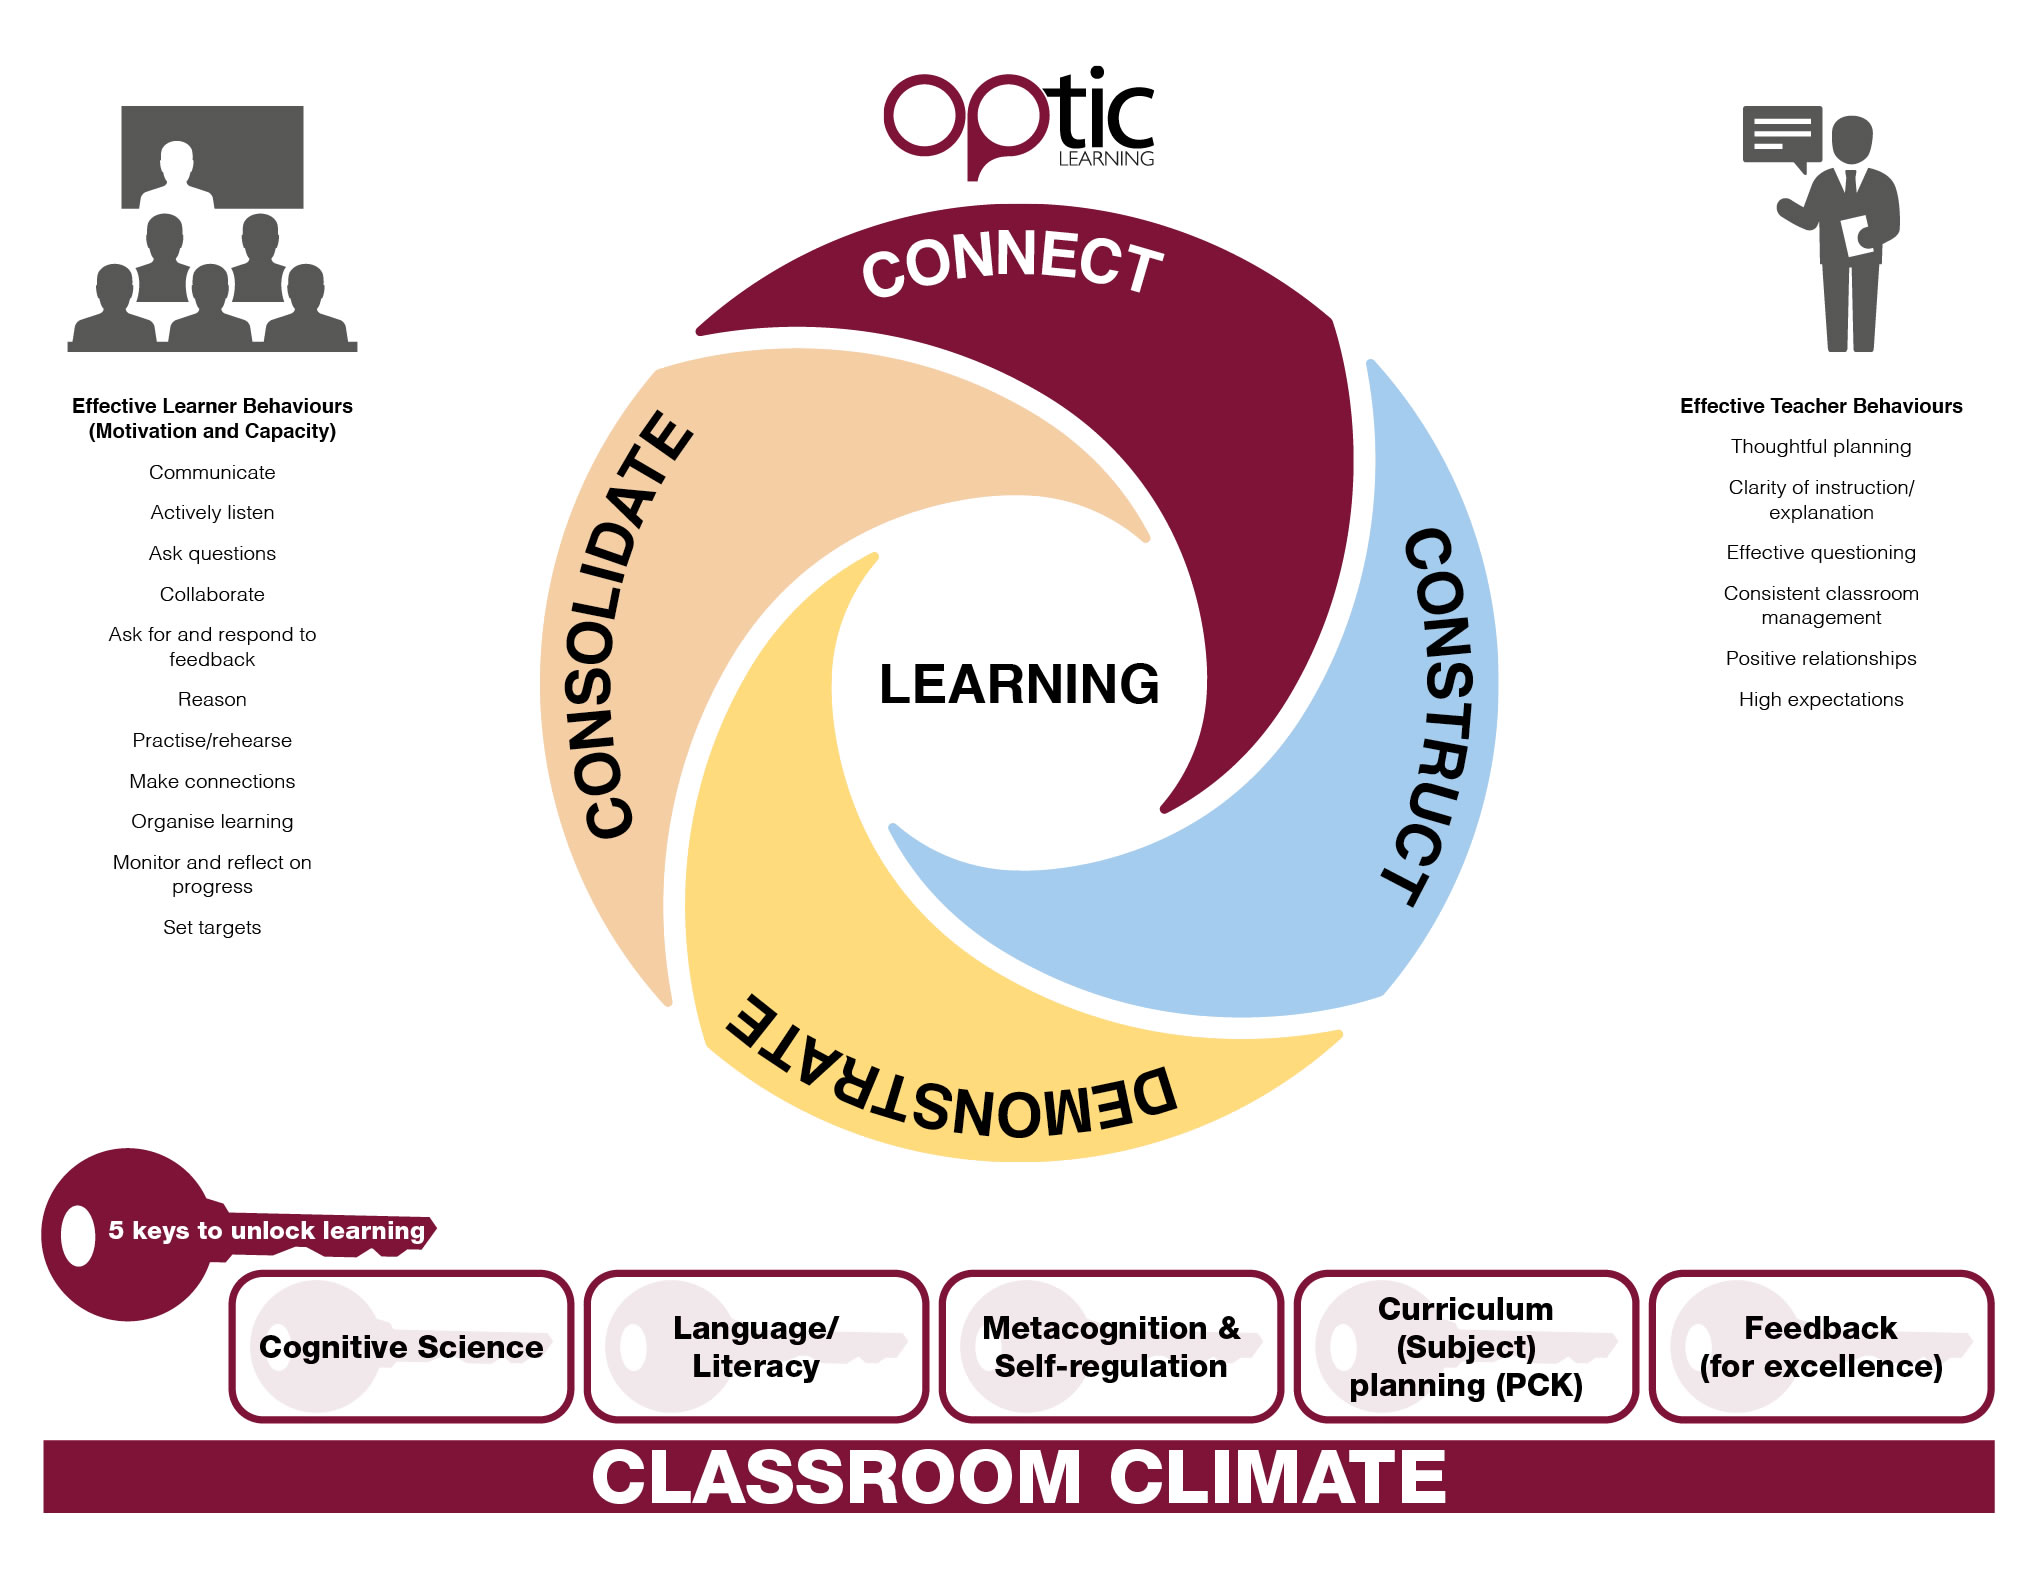 teaching and learning optic model